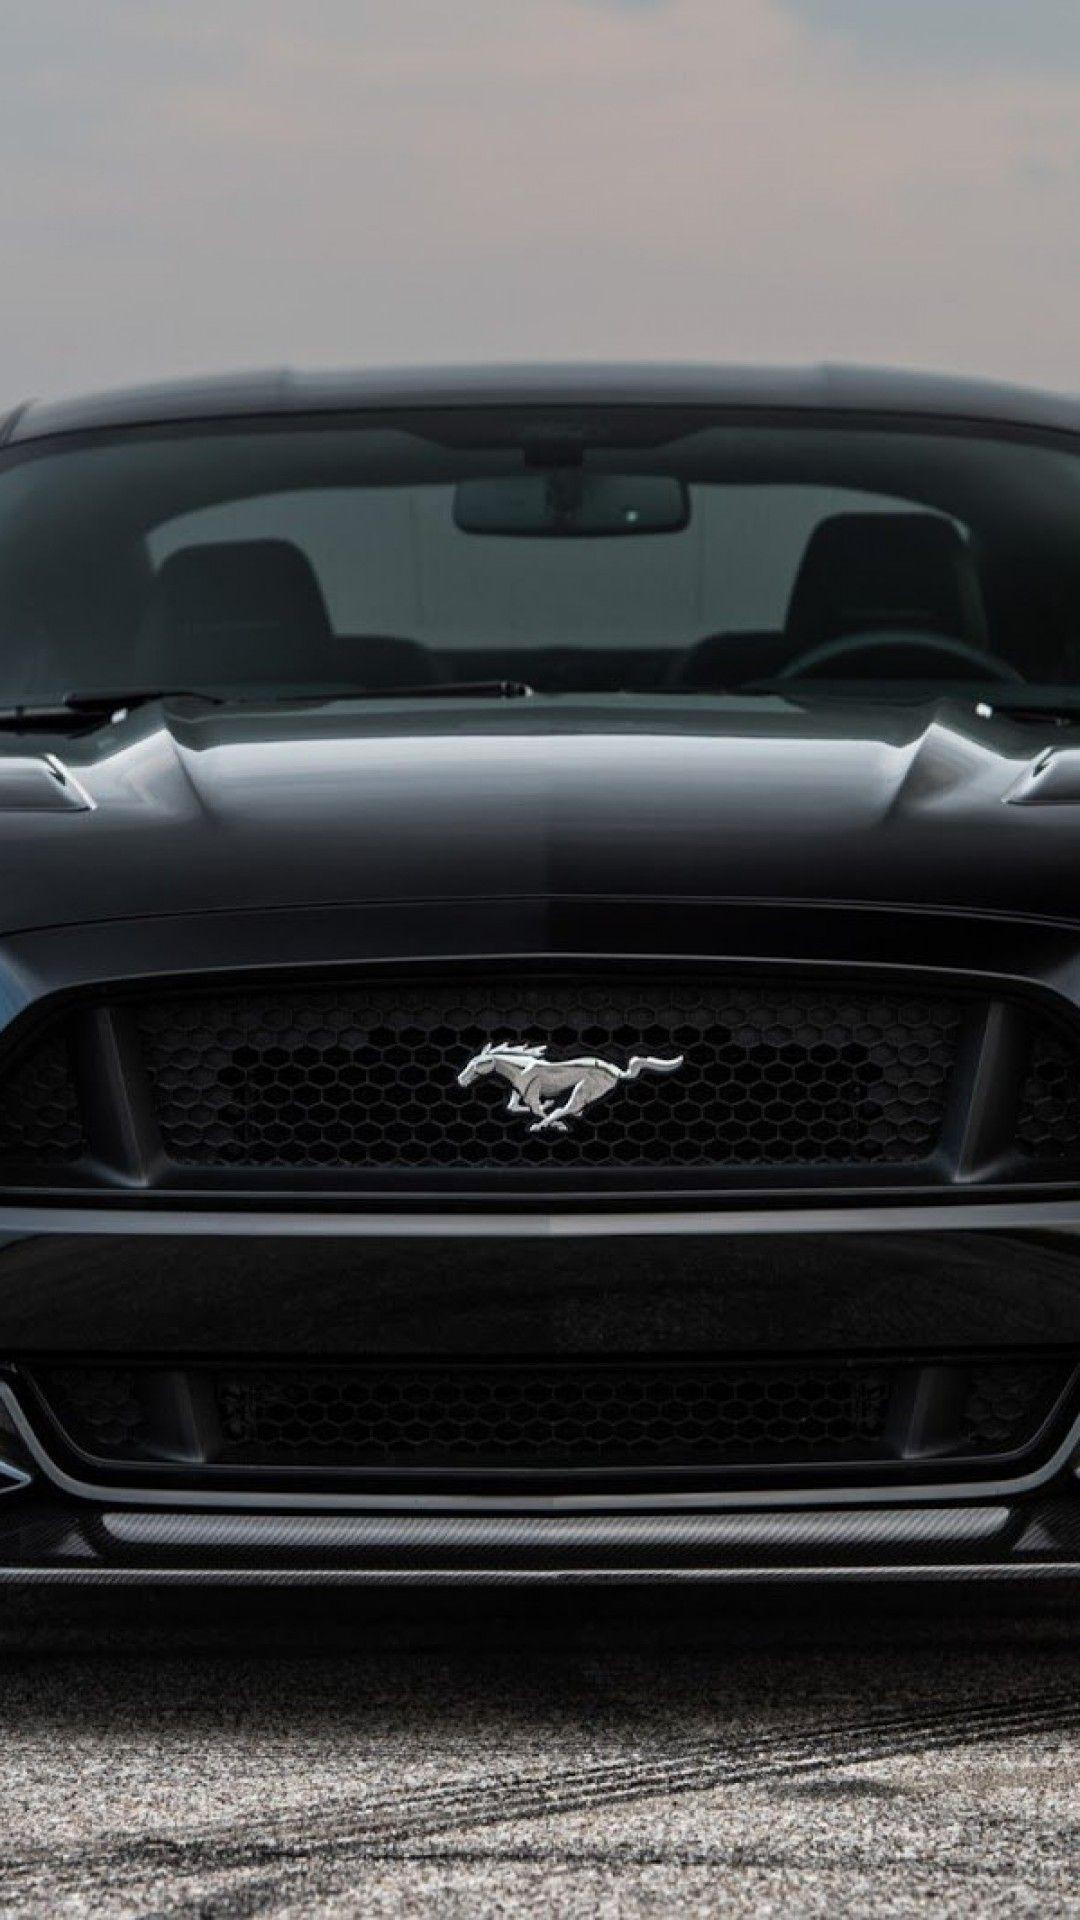 Ford Mustang GT Wallpaper 4K, Muscle sports cars, 5K